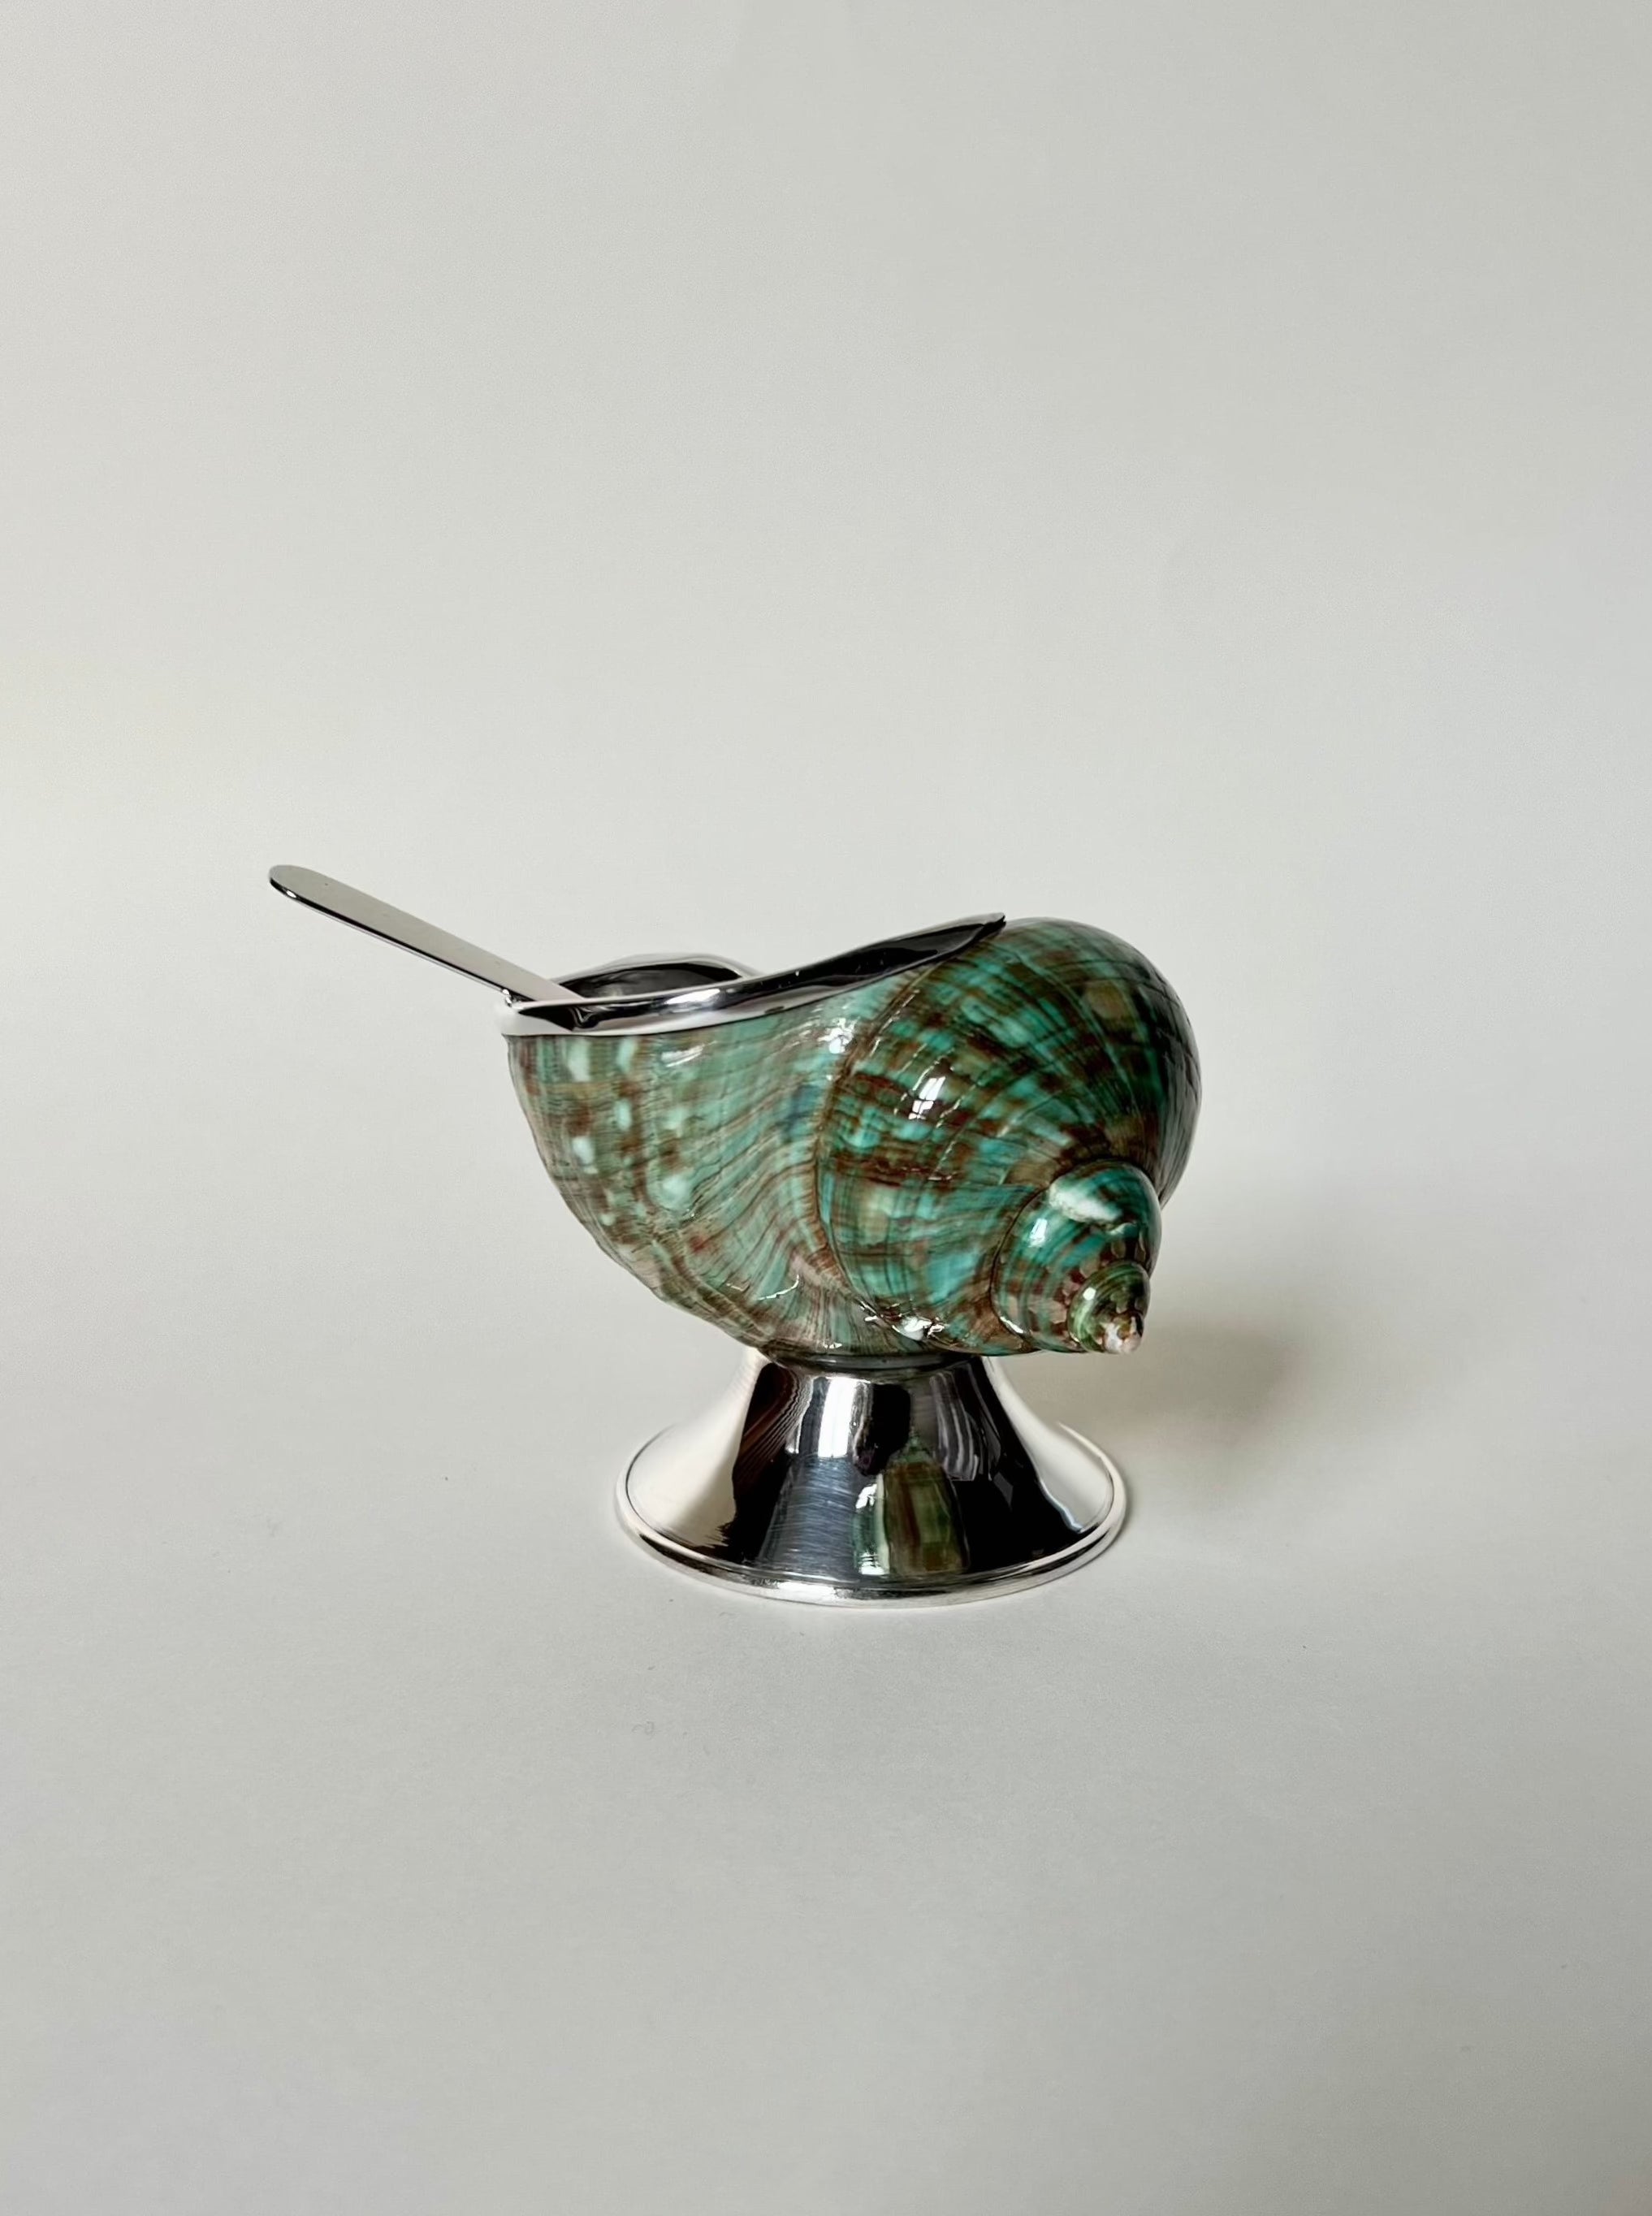 Handcrafted Jade Shell Sugar Bowl made of natural, sustainable materials for kitchen use